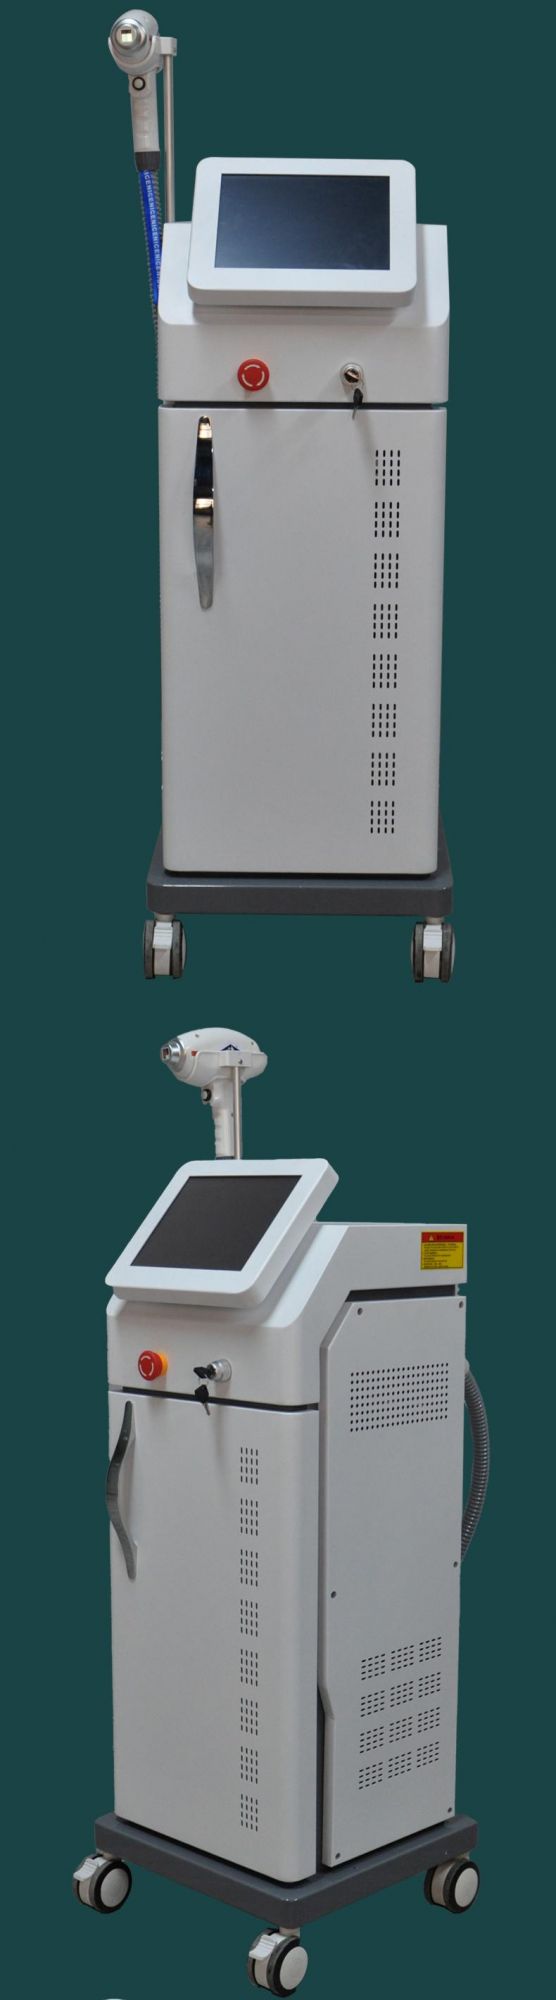 High-End Hair Removal Series Ergonomic Design Handle 808nm Semiconductor Diode Laser Beauty Machine